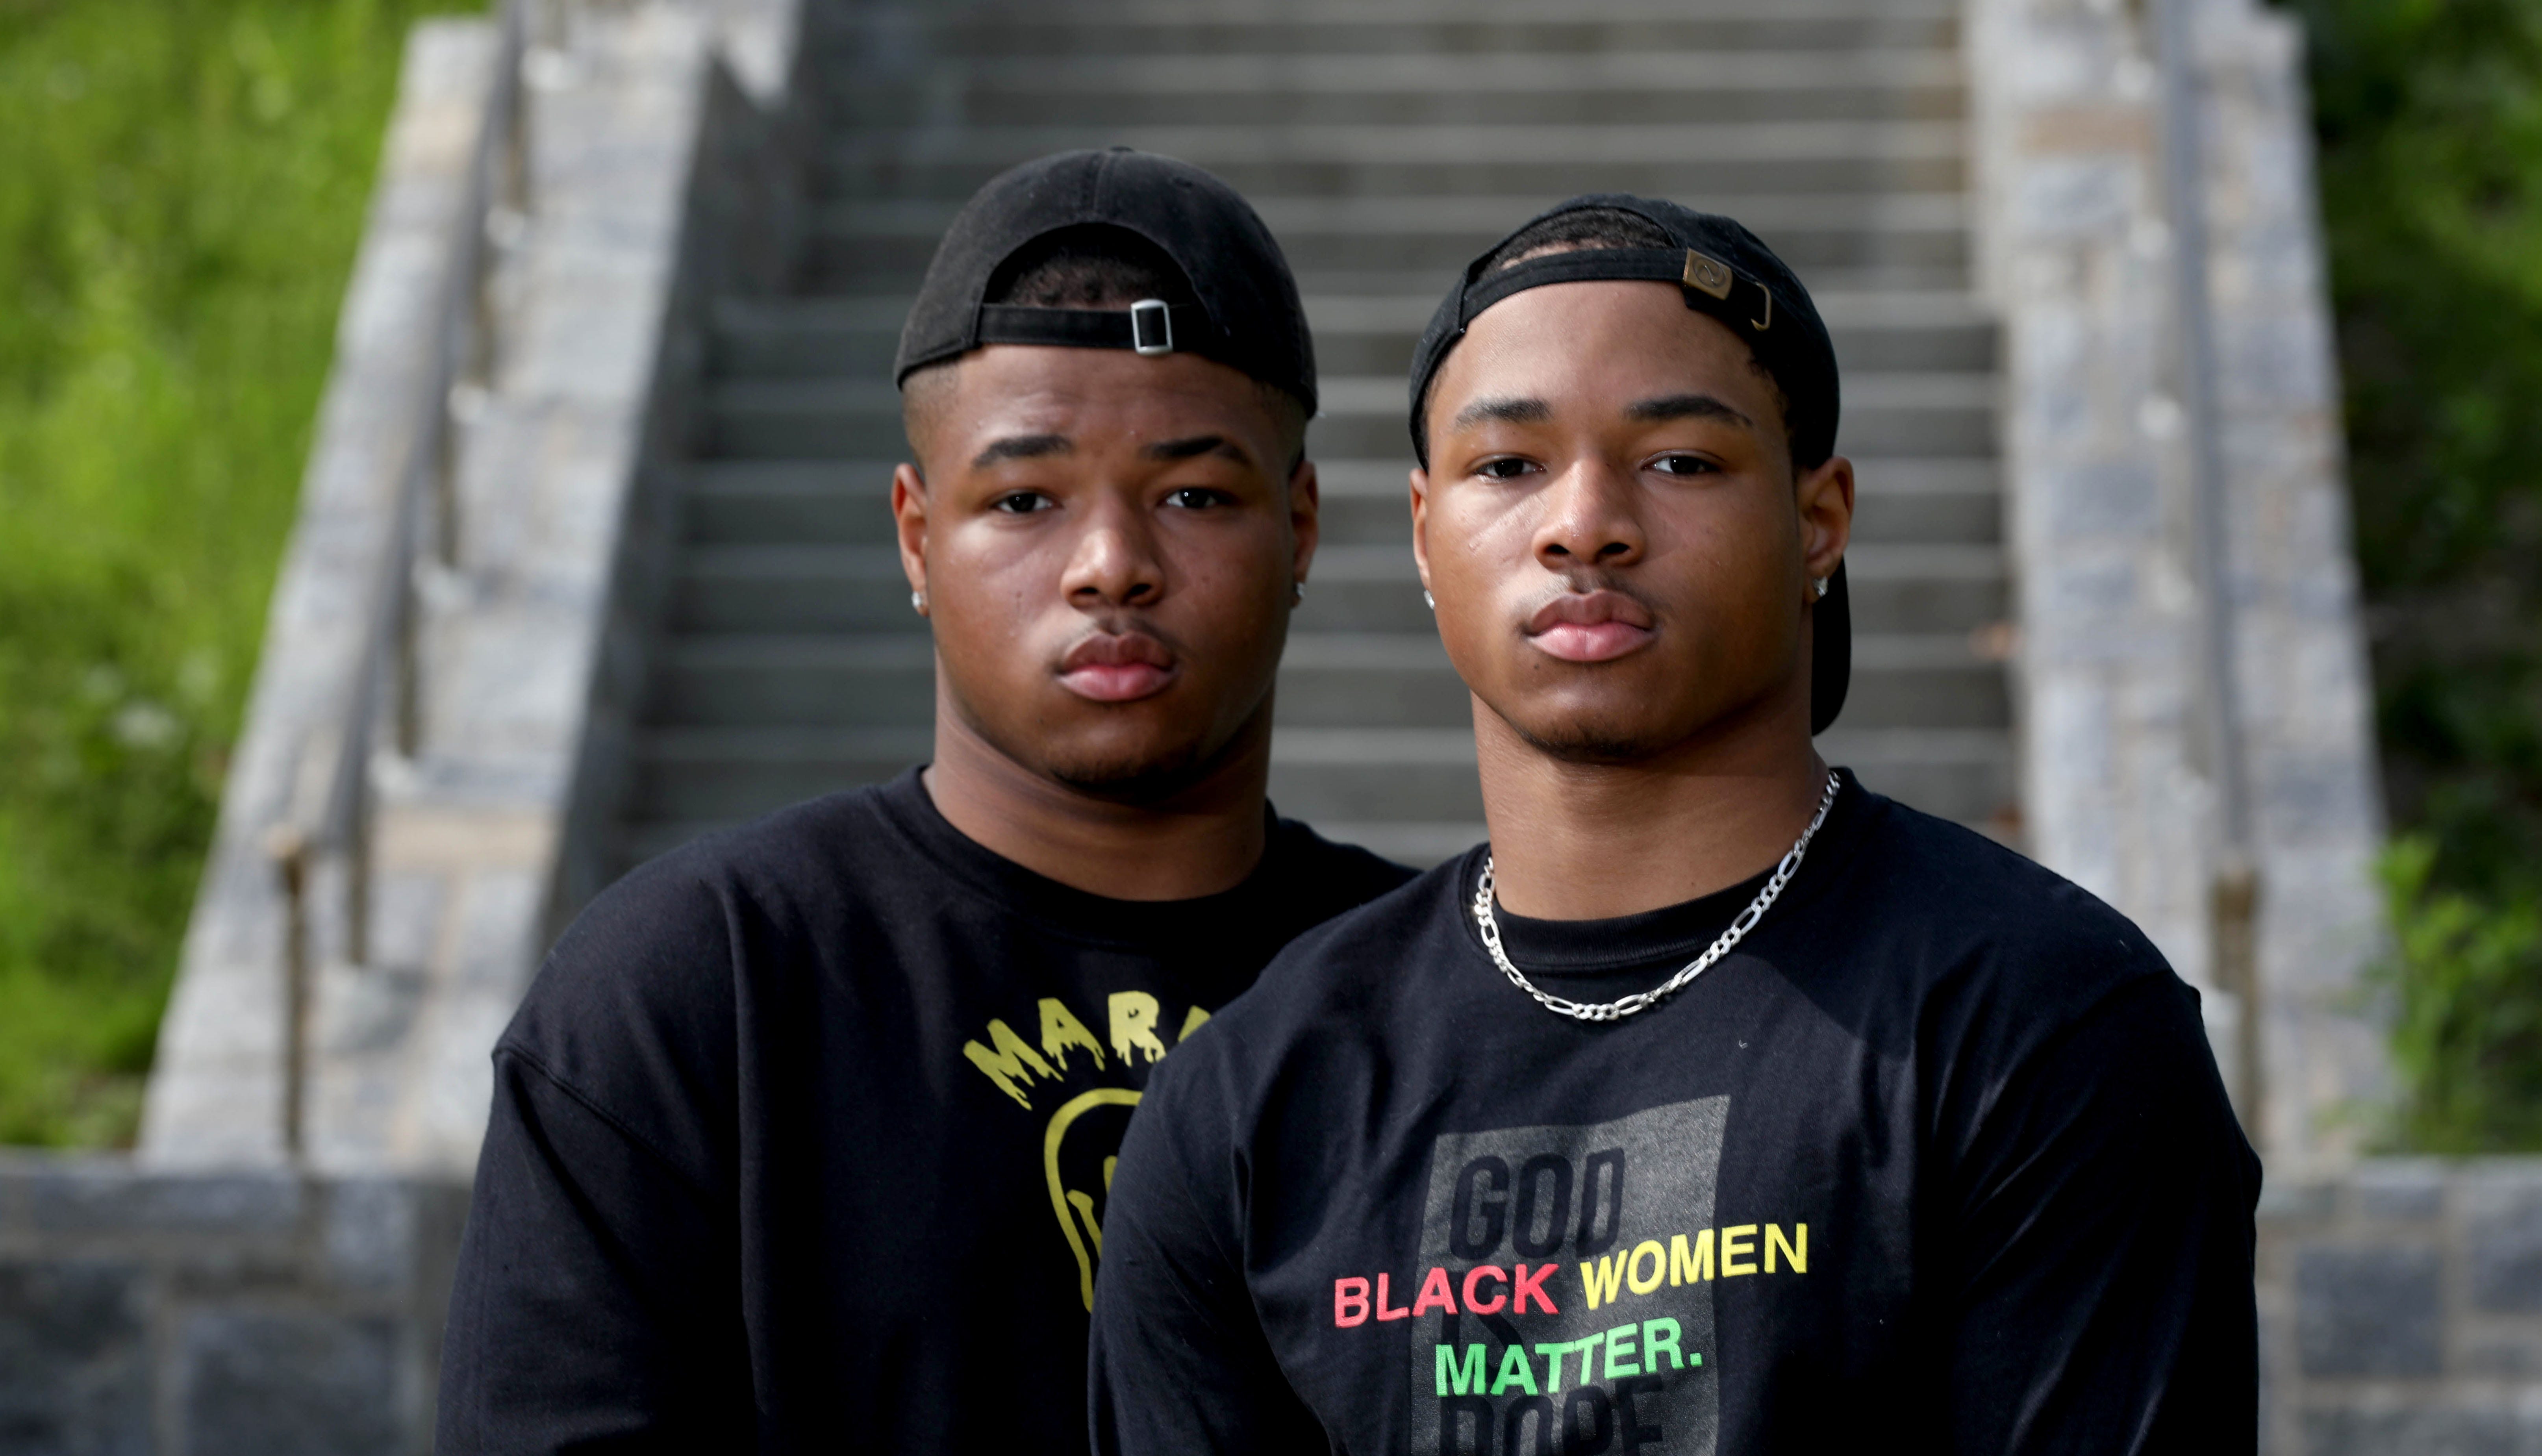 Keon and Klanell Lee, 19, of Yonkers, are both planning on becoming members of the Yonkers Police Department. The twins, photographed April 27, 2021 at Marist College in Poughkeepsie, where they are finishing up their freshman year, said that one of the reasons for them wanting make careers in law enforcement was to help change the culture of policing.